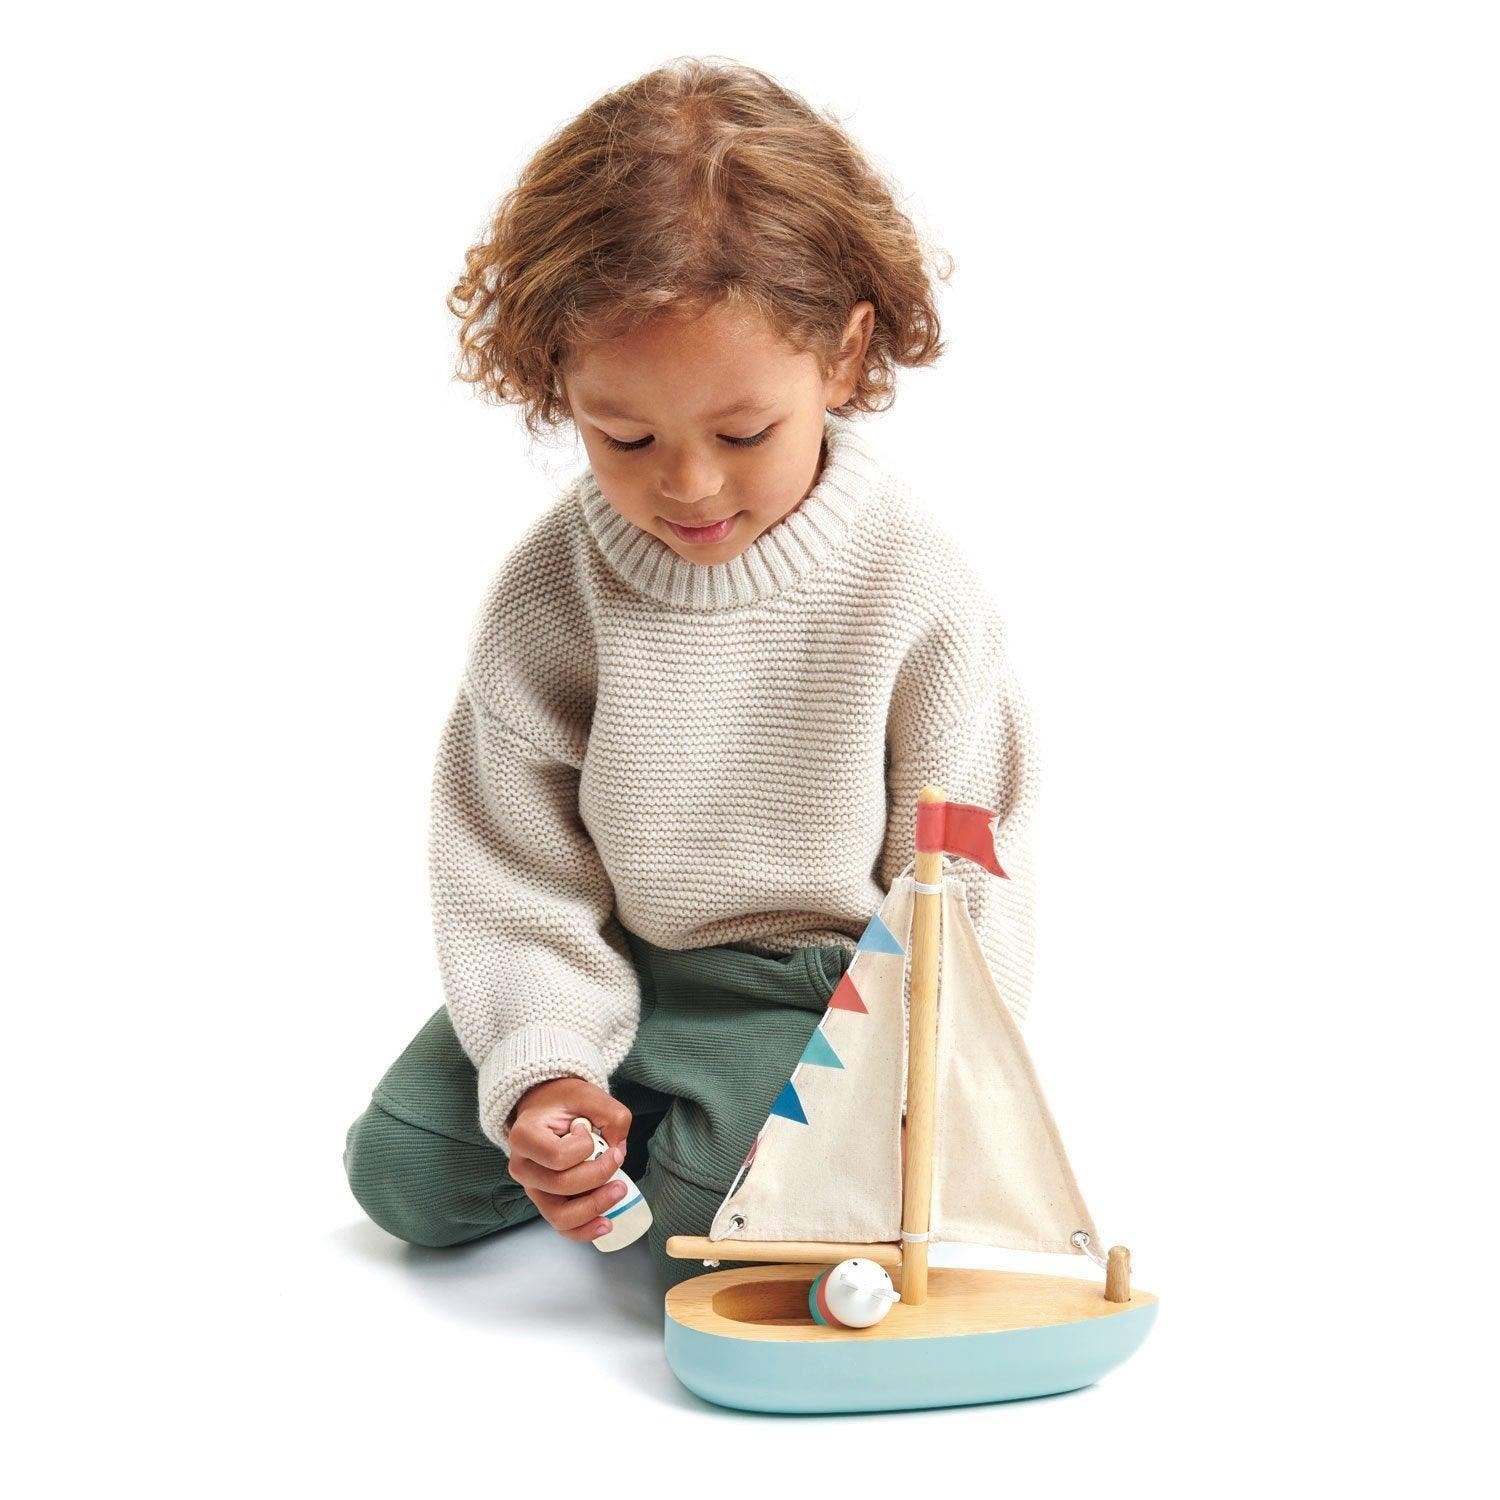 Tender Leaf Sailaway Boat - Why and Whale